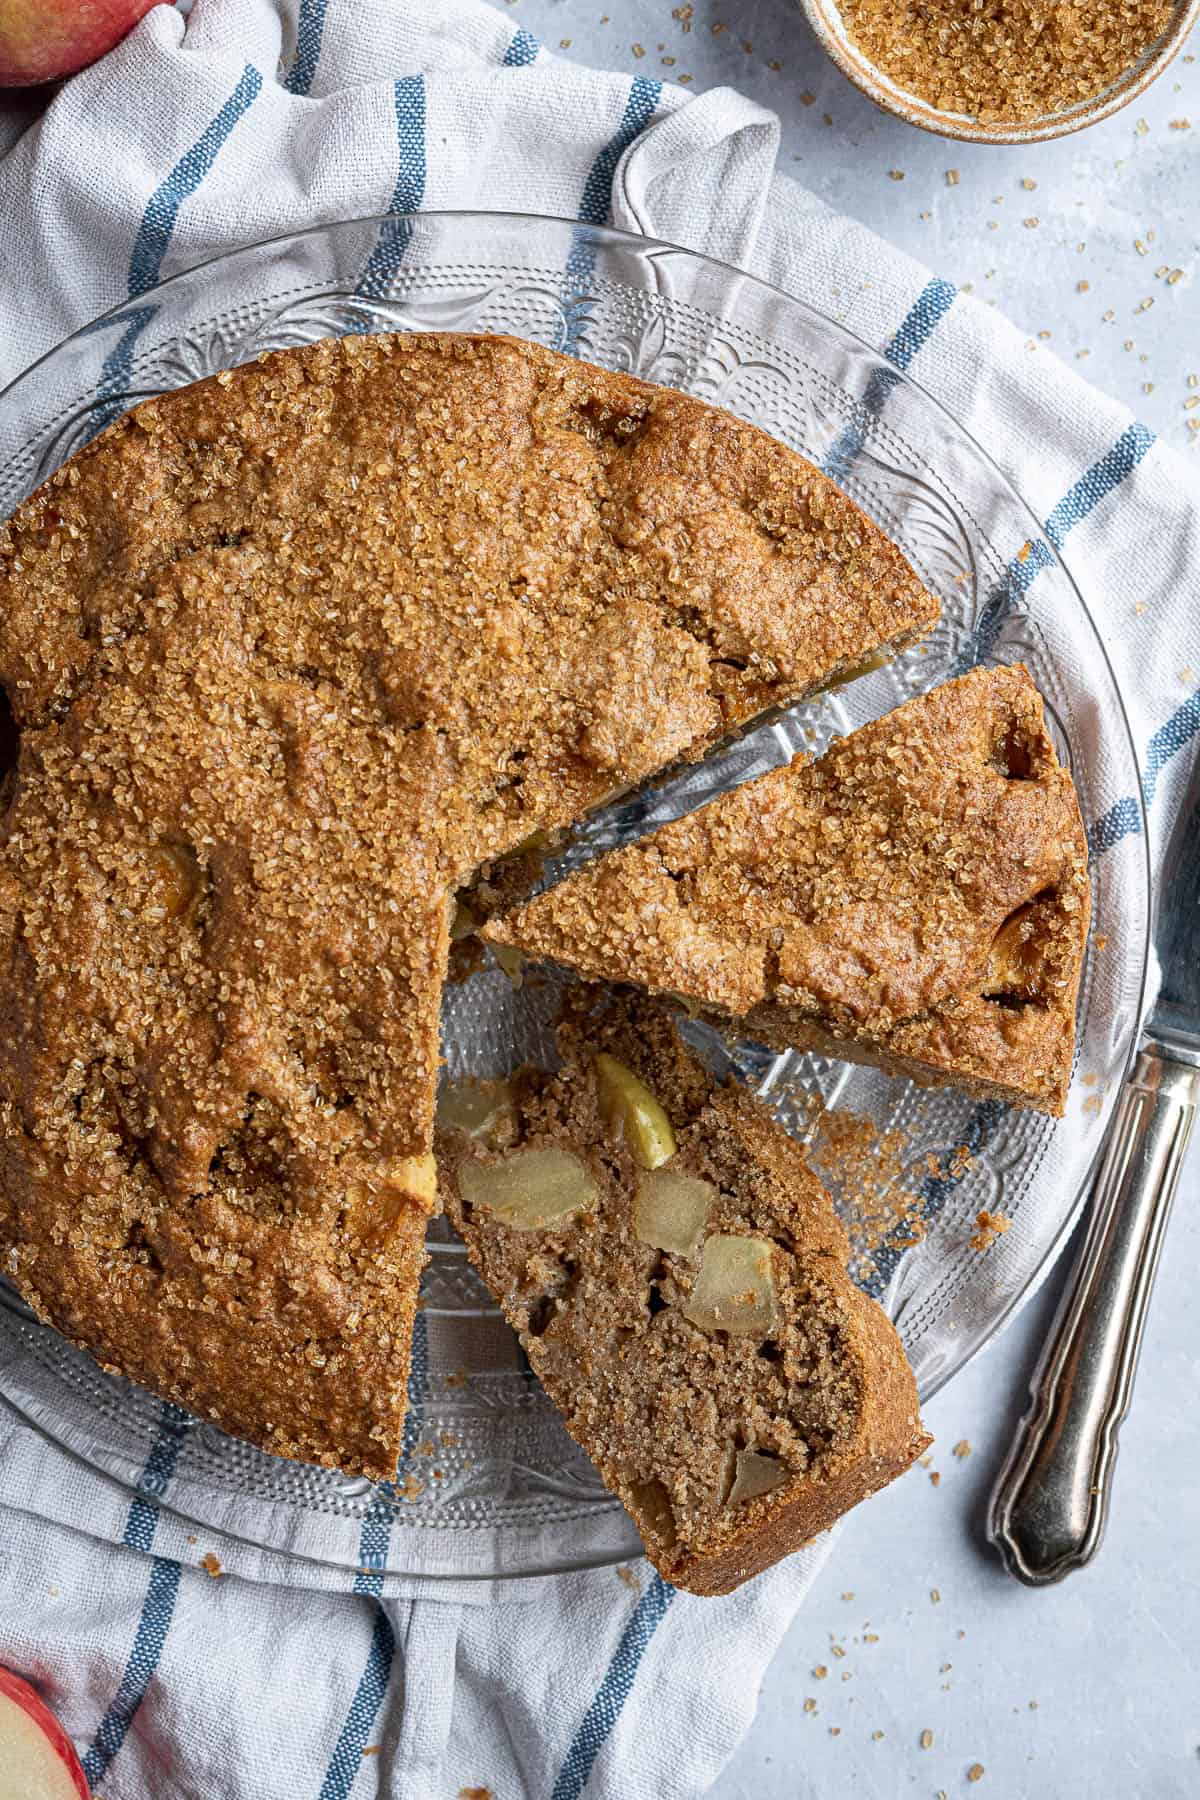 Close up of the sliced wholemeal apple cake.